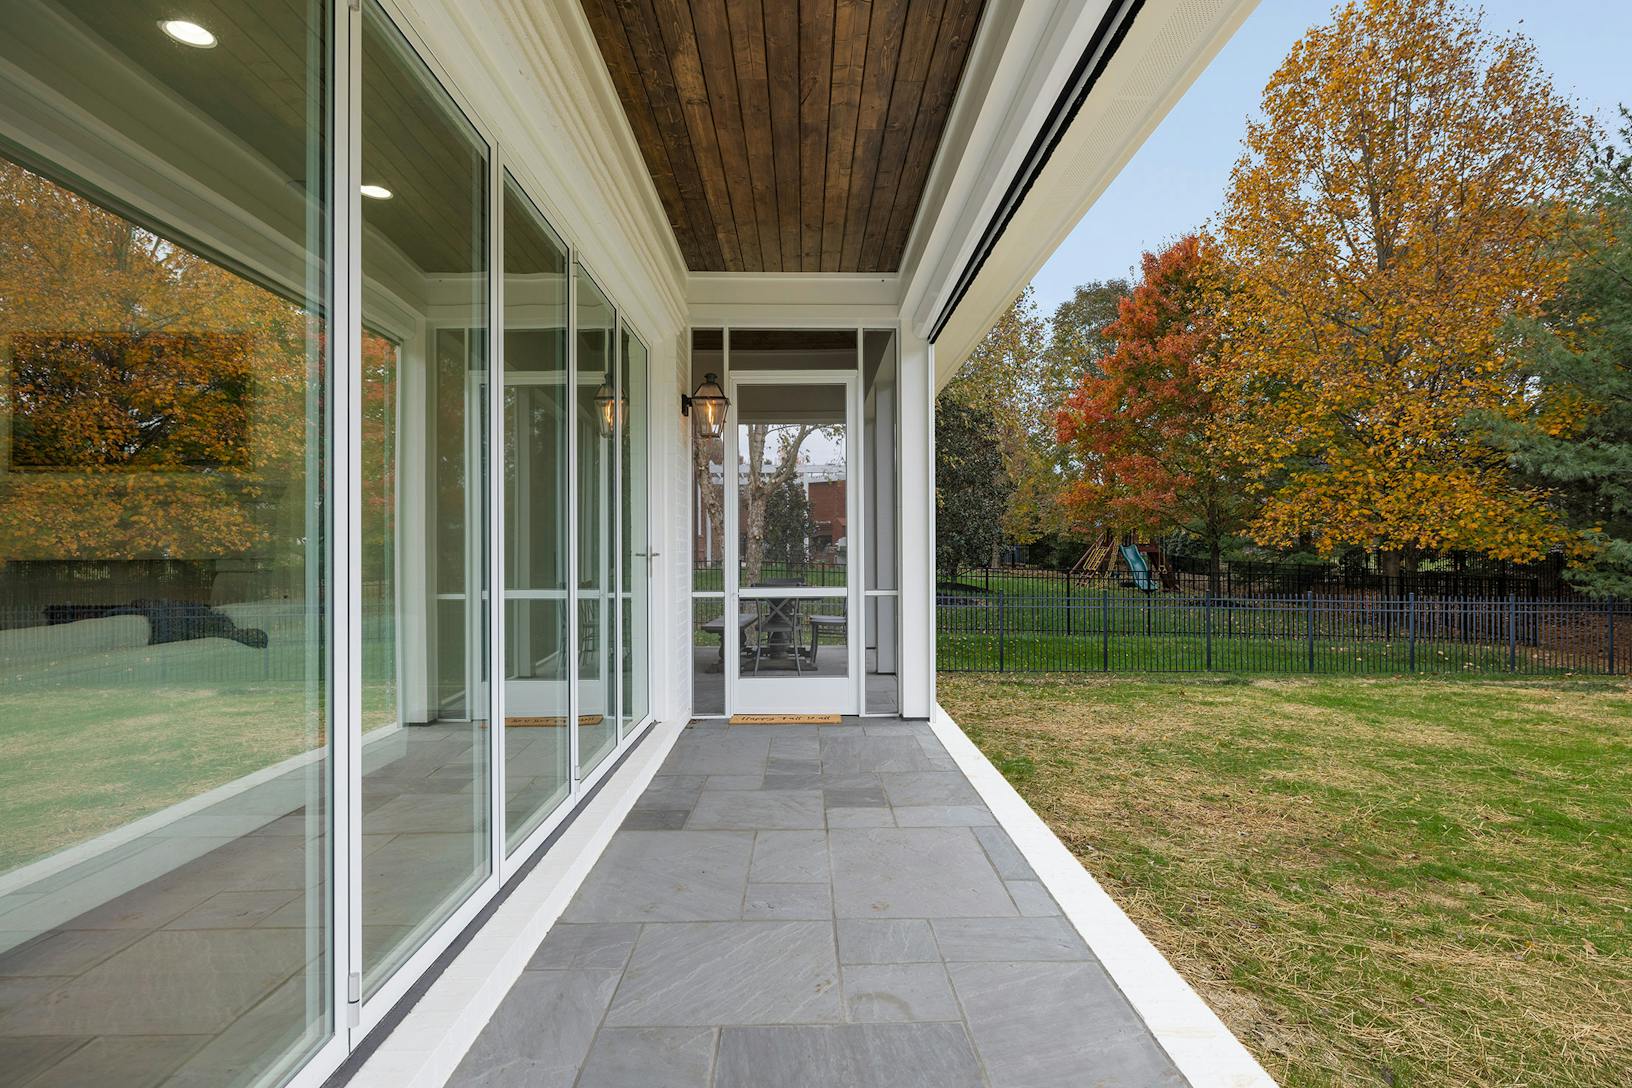 A porch with folding glass walls and a grassy area